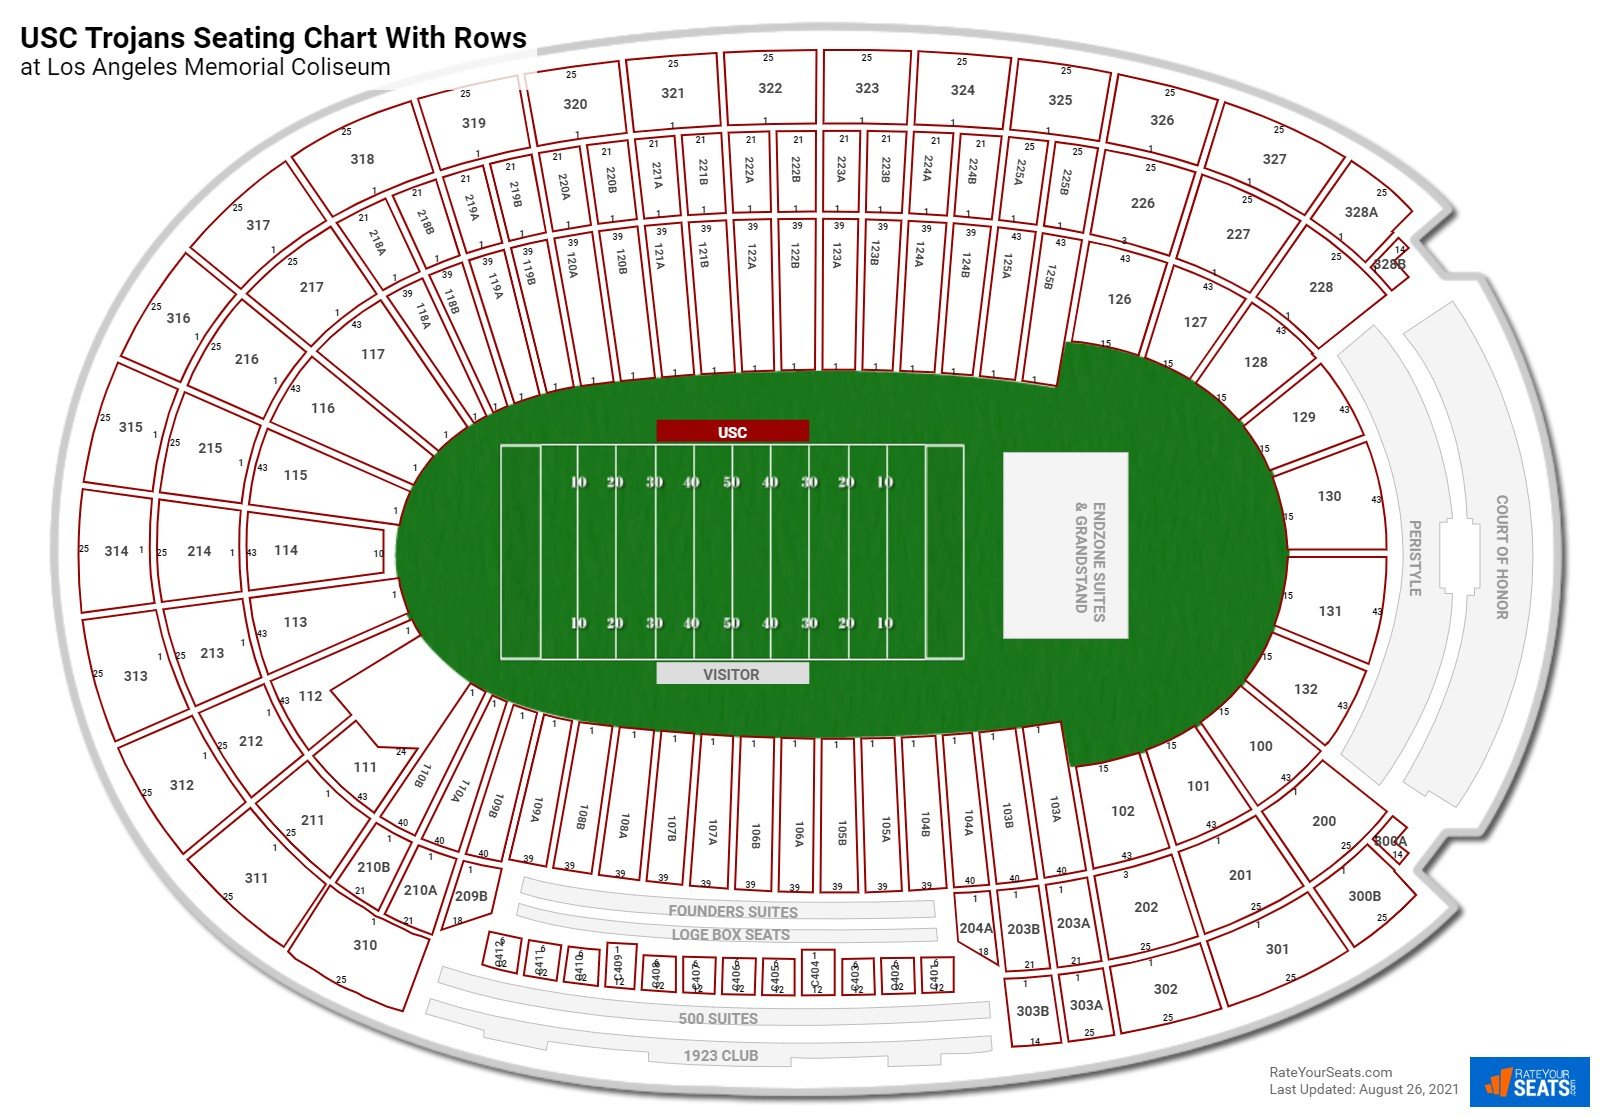 Los Angeles Memorial Coliseum Seating Chart With Row Numbers.